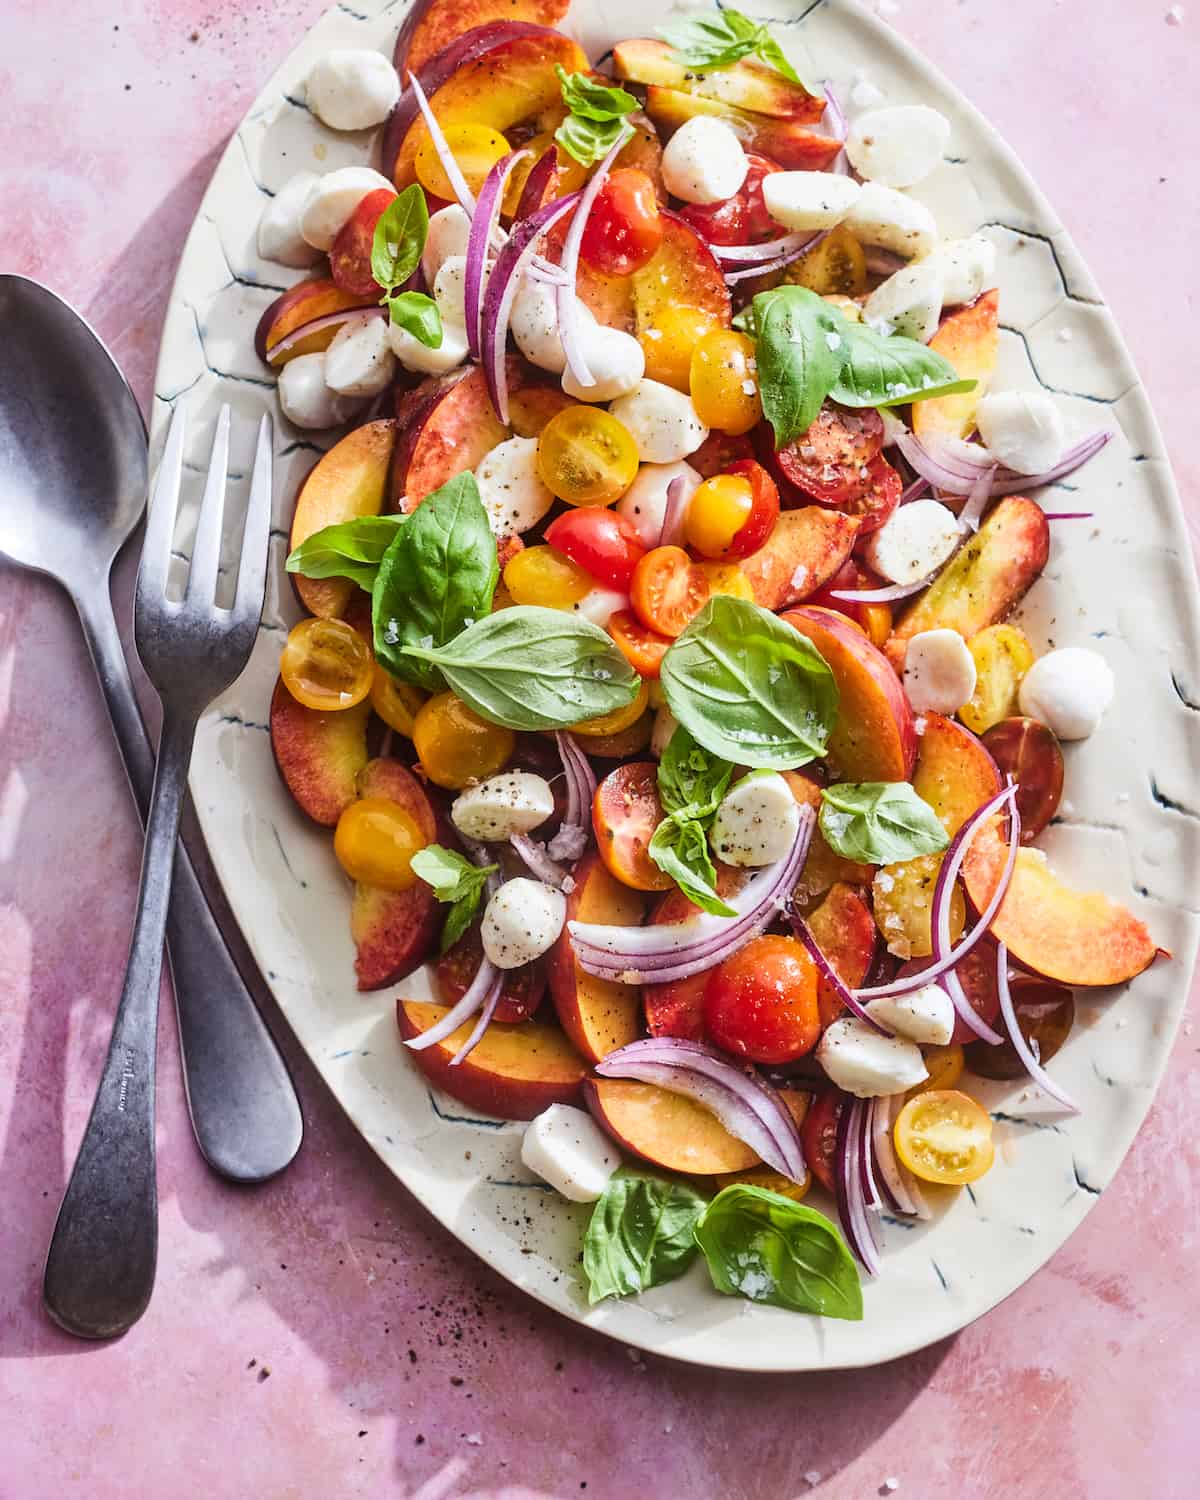 Sliced up peaches, halved cherry tomatoes, leaves of basil and sliced onions on a plate next to a serving fork and spoon.  